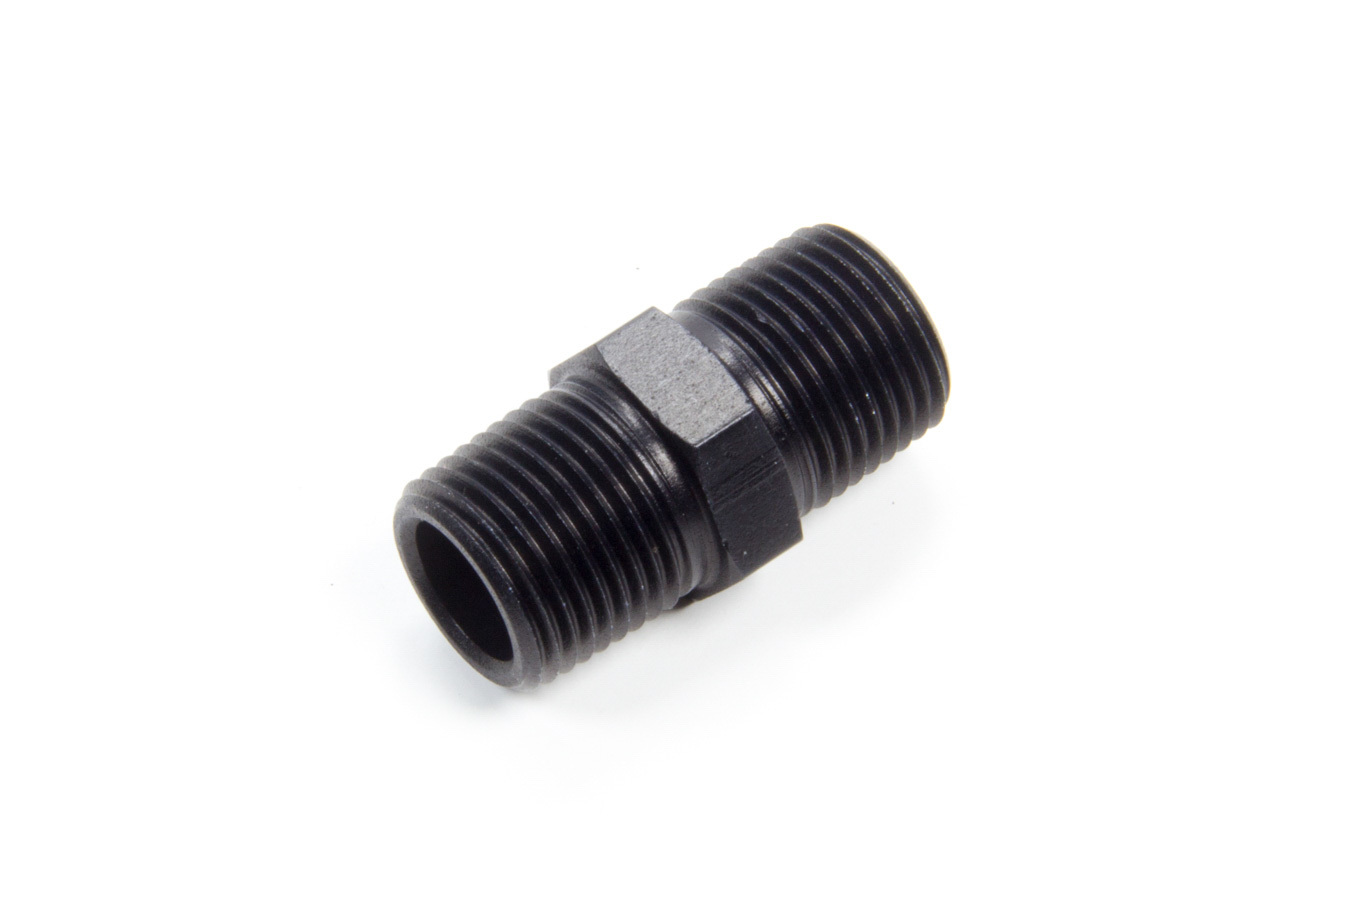 Aeroquip FCM5134 Fitting, Adapter, Straight, 3/8 in NPT Male to 3/8 in NPT Male, Aluminum, Black Anodized, Each